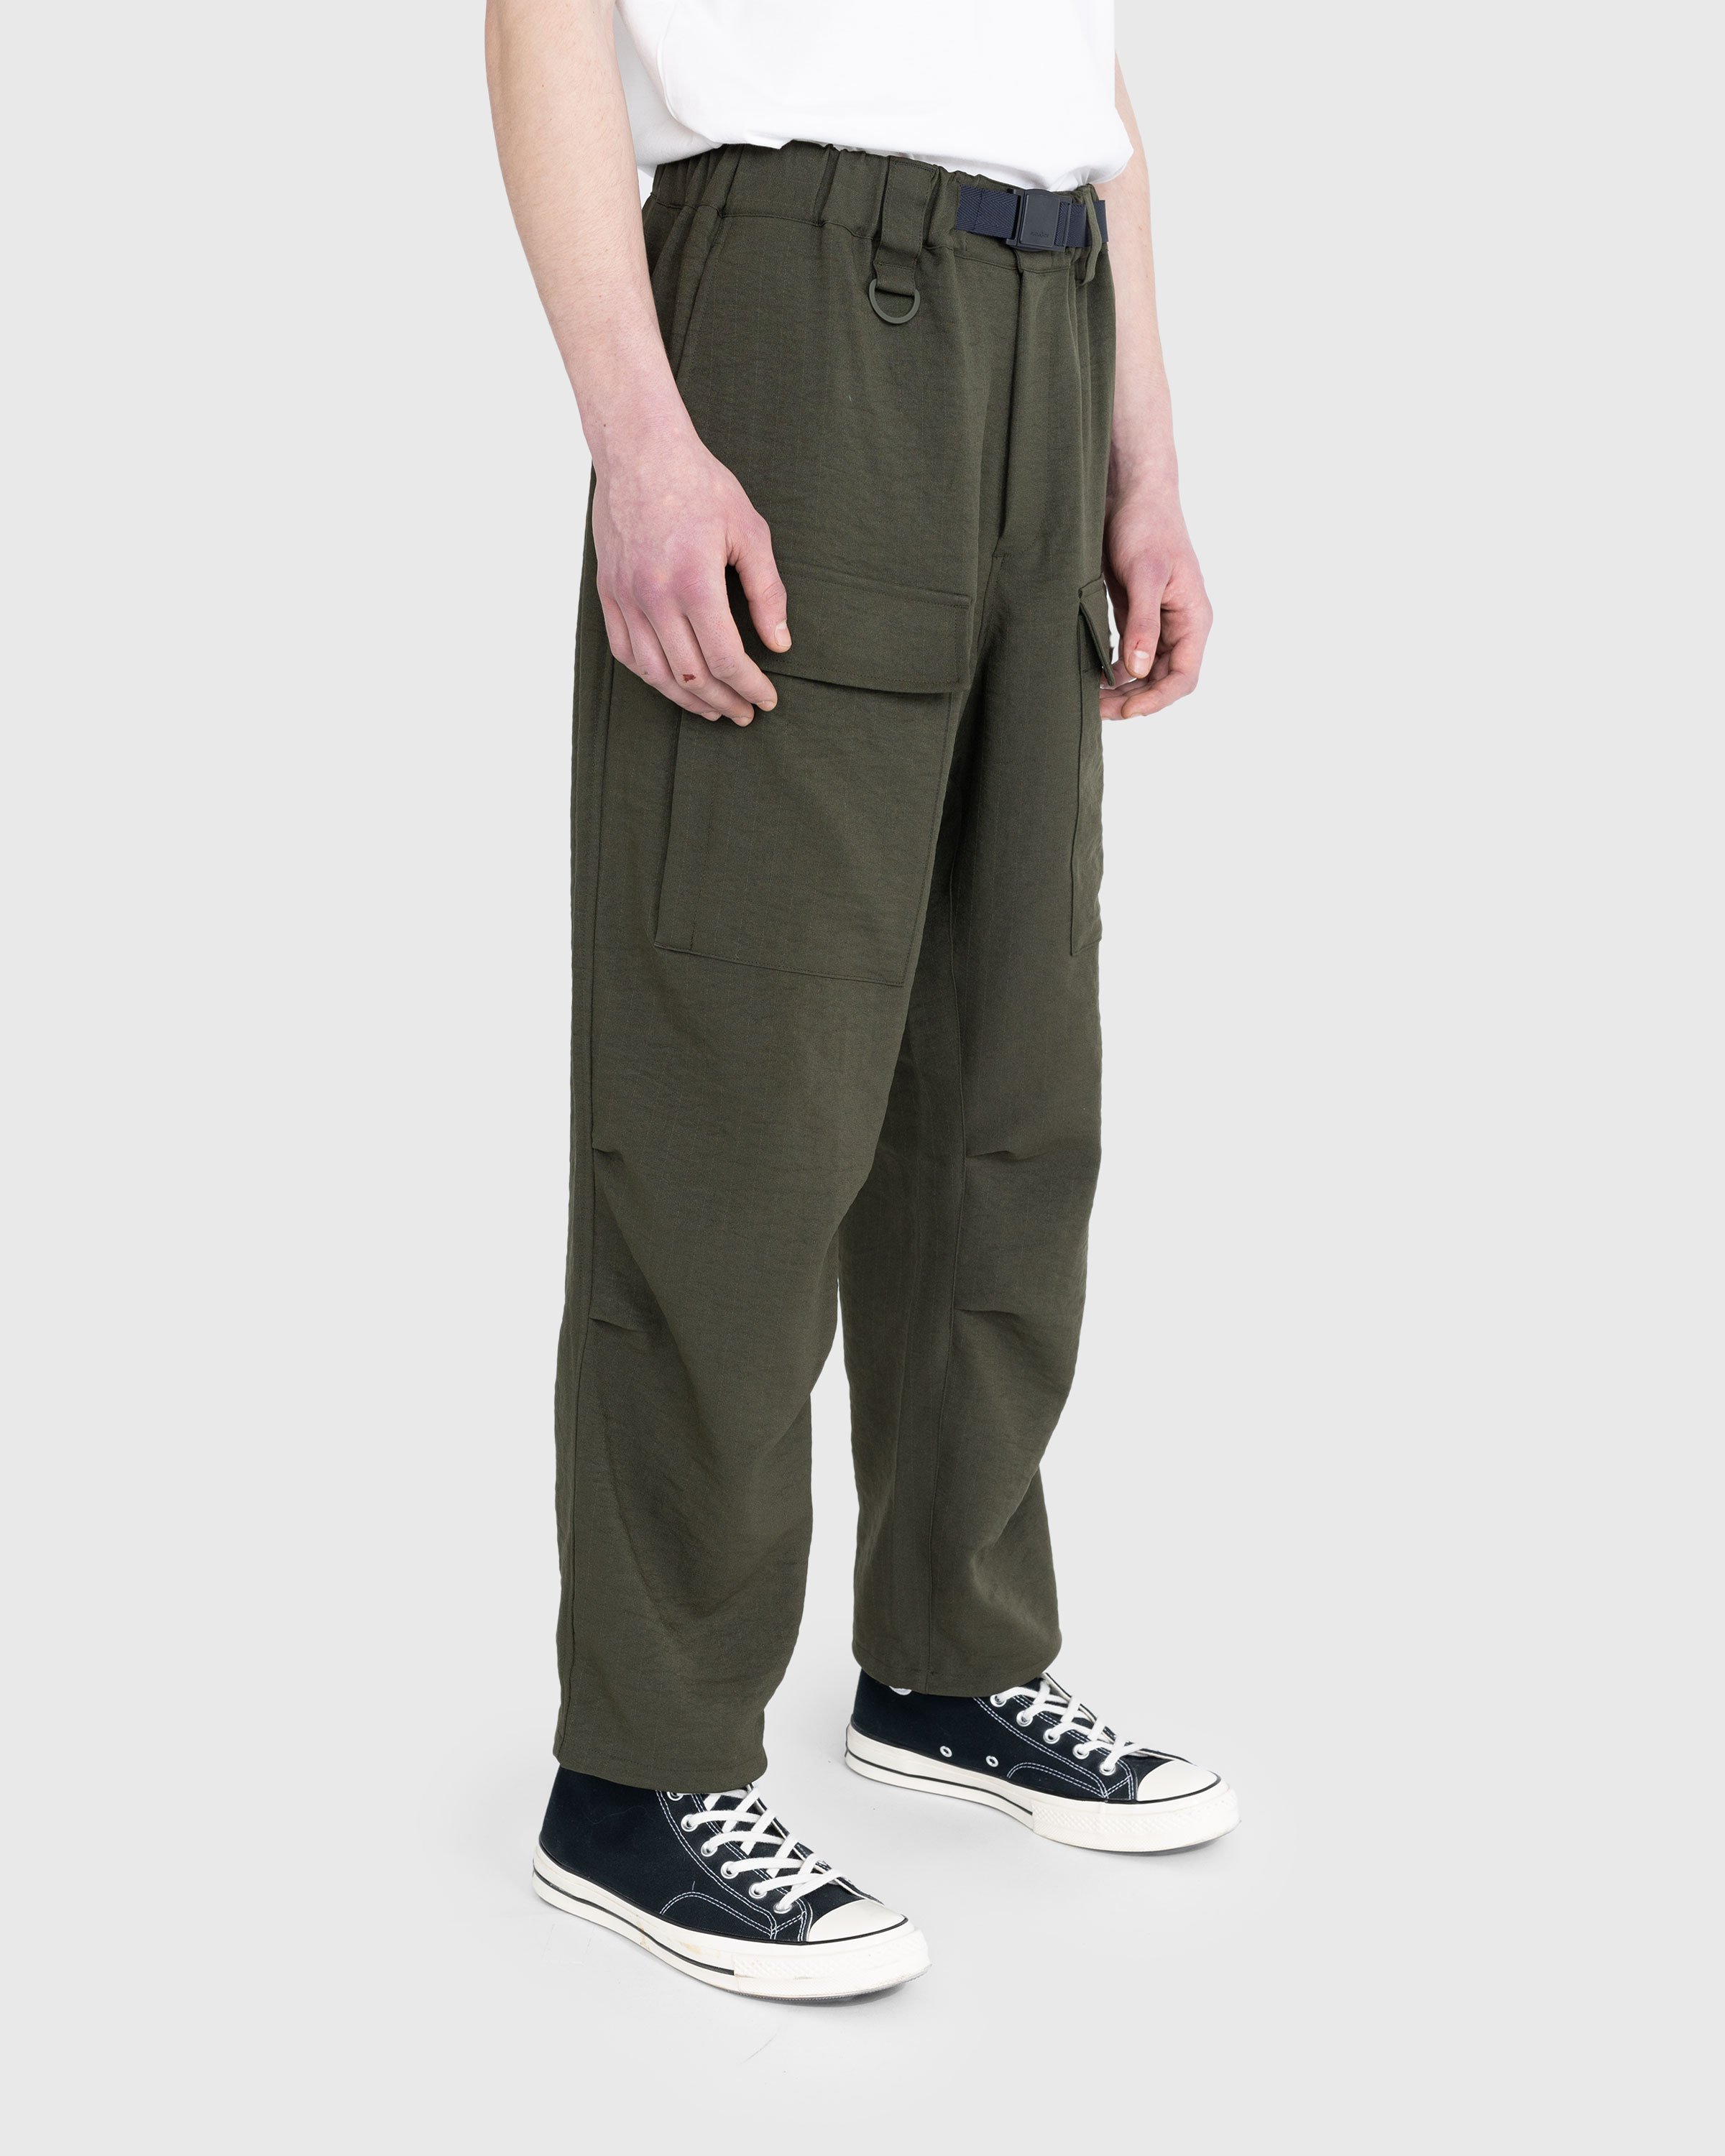 Y-3 - CL SL Cargo Pants - Clothing - Green - Image 4